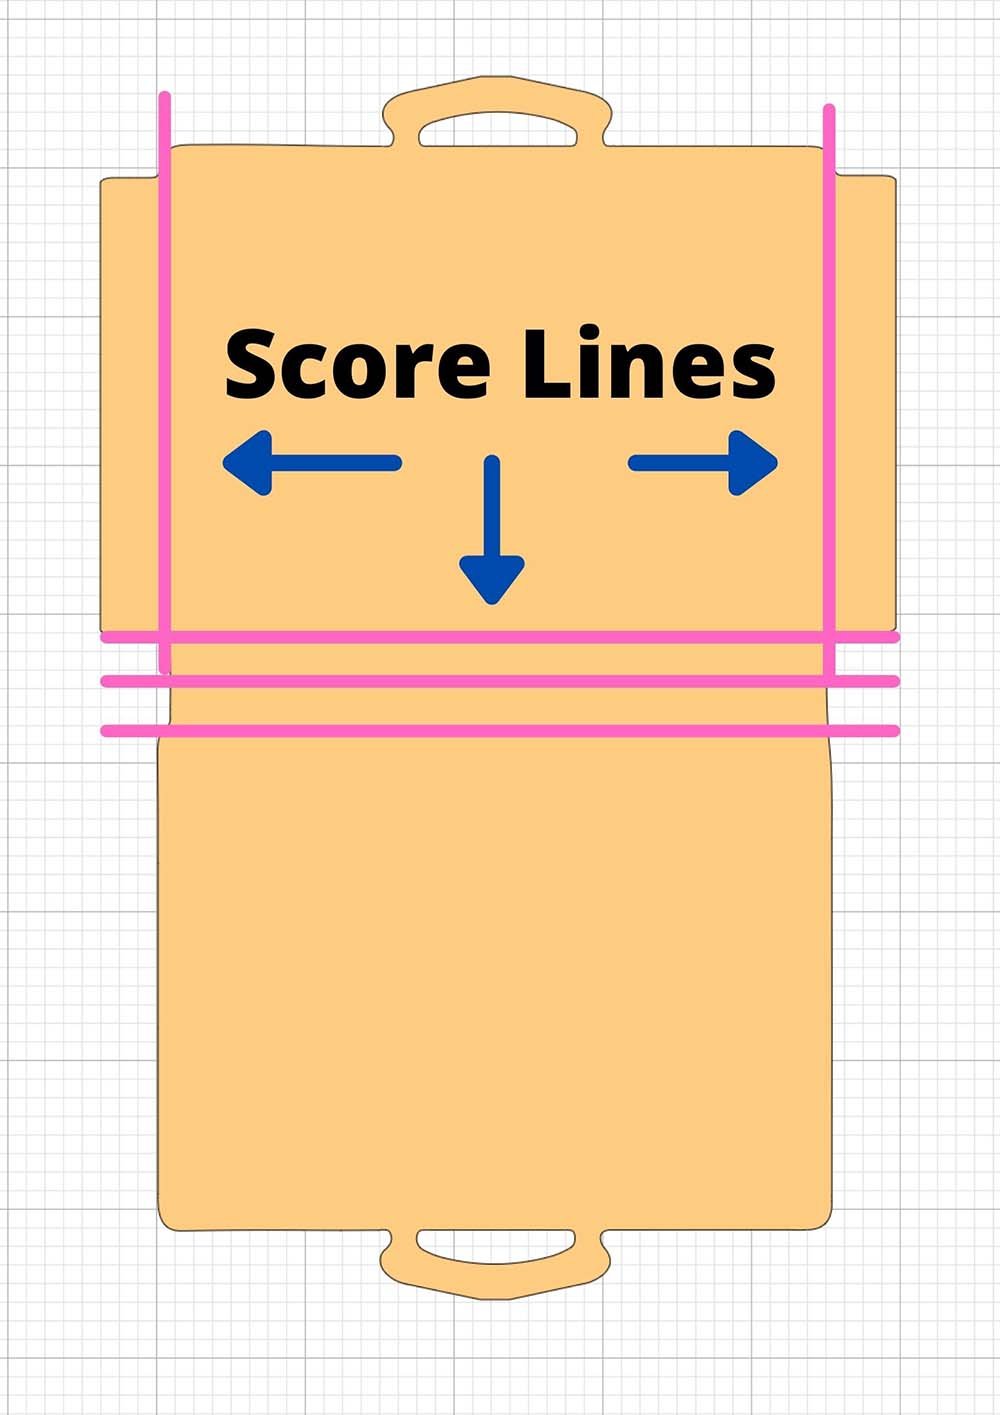 Score Lines to follow with a ruler and scoring tool